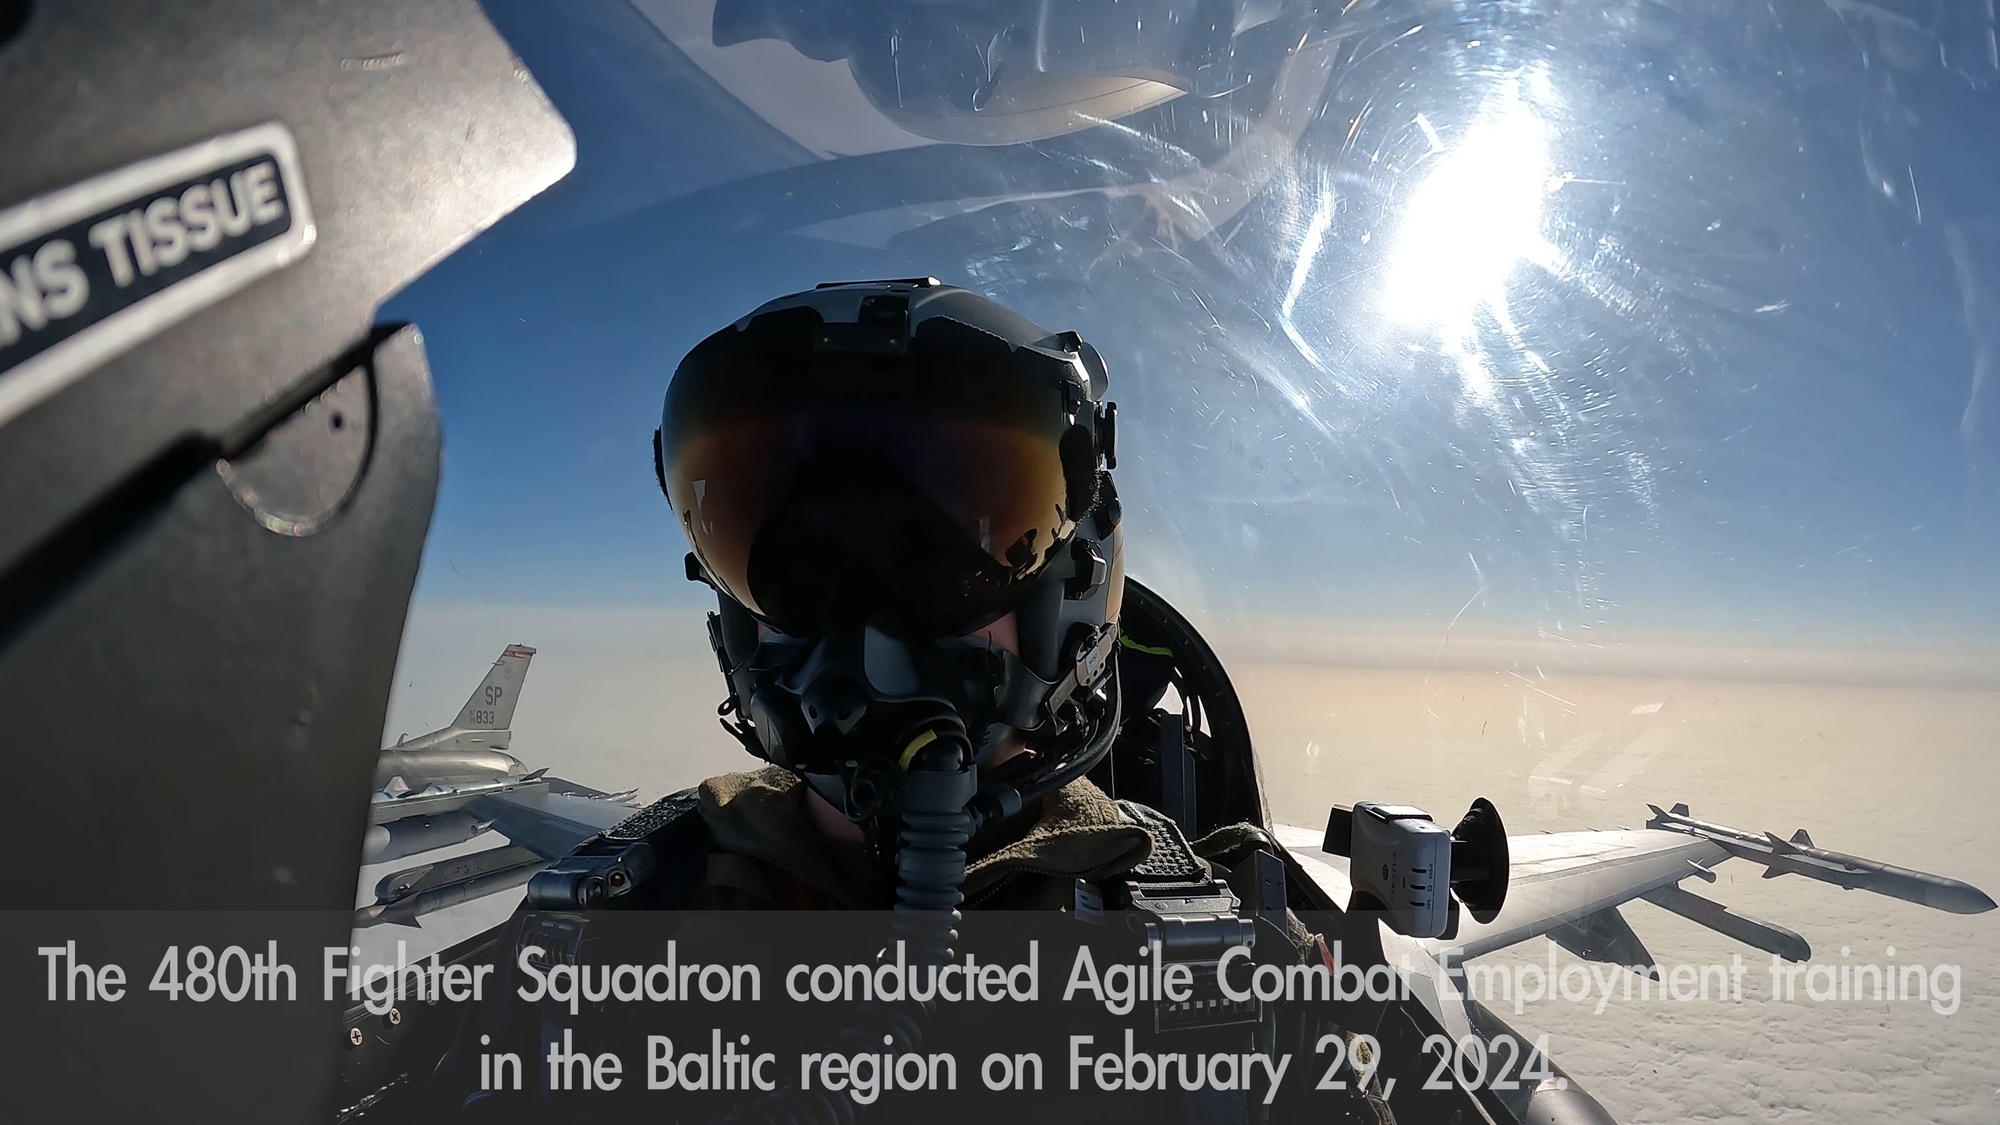 U.S. Air Force F-16 Fighting Falcon pilots assigned to the 480th Fighter Squadron practice fighter maneuver training over Estonia, Feb. 29, 2024. After the 100th Air Refueling Wing’s KC-135s provided fuel to 52nd Fighter Wing F-16s, the 480th FS interacted with Estonian Defense Forces and Polish Air Forces on the ground, strengthening the NATO alliances and developing partnerships. (U.S. Air Force video by Airman 1st Class Albert Morel )